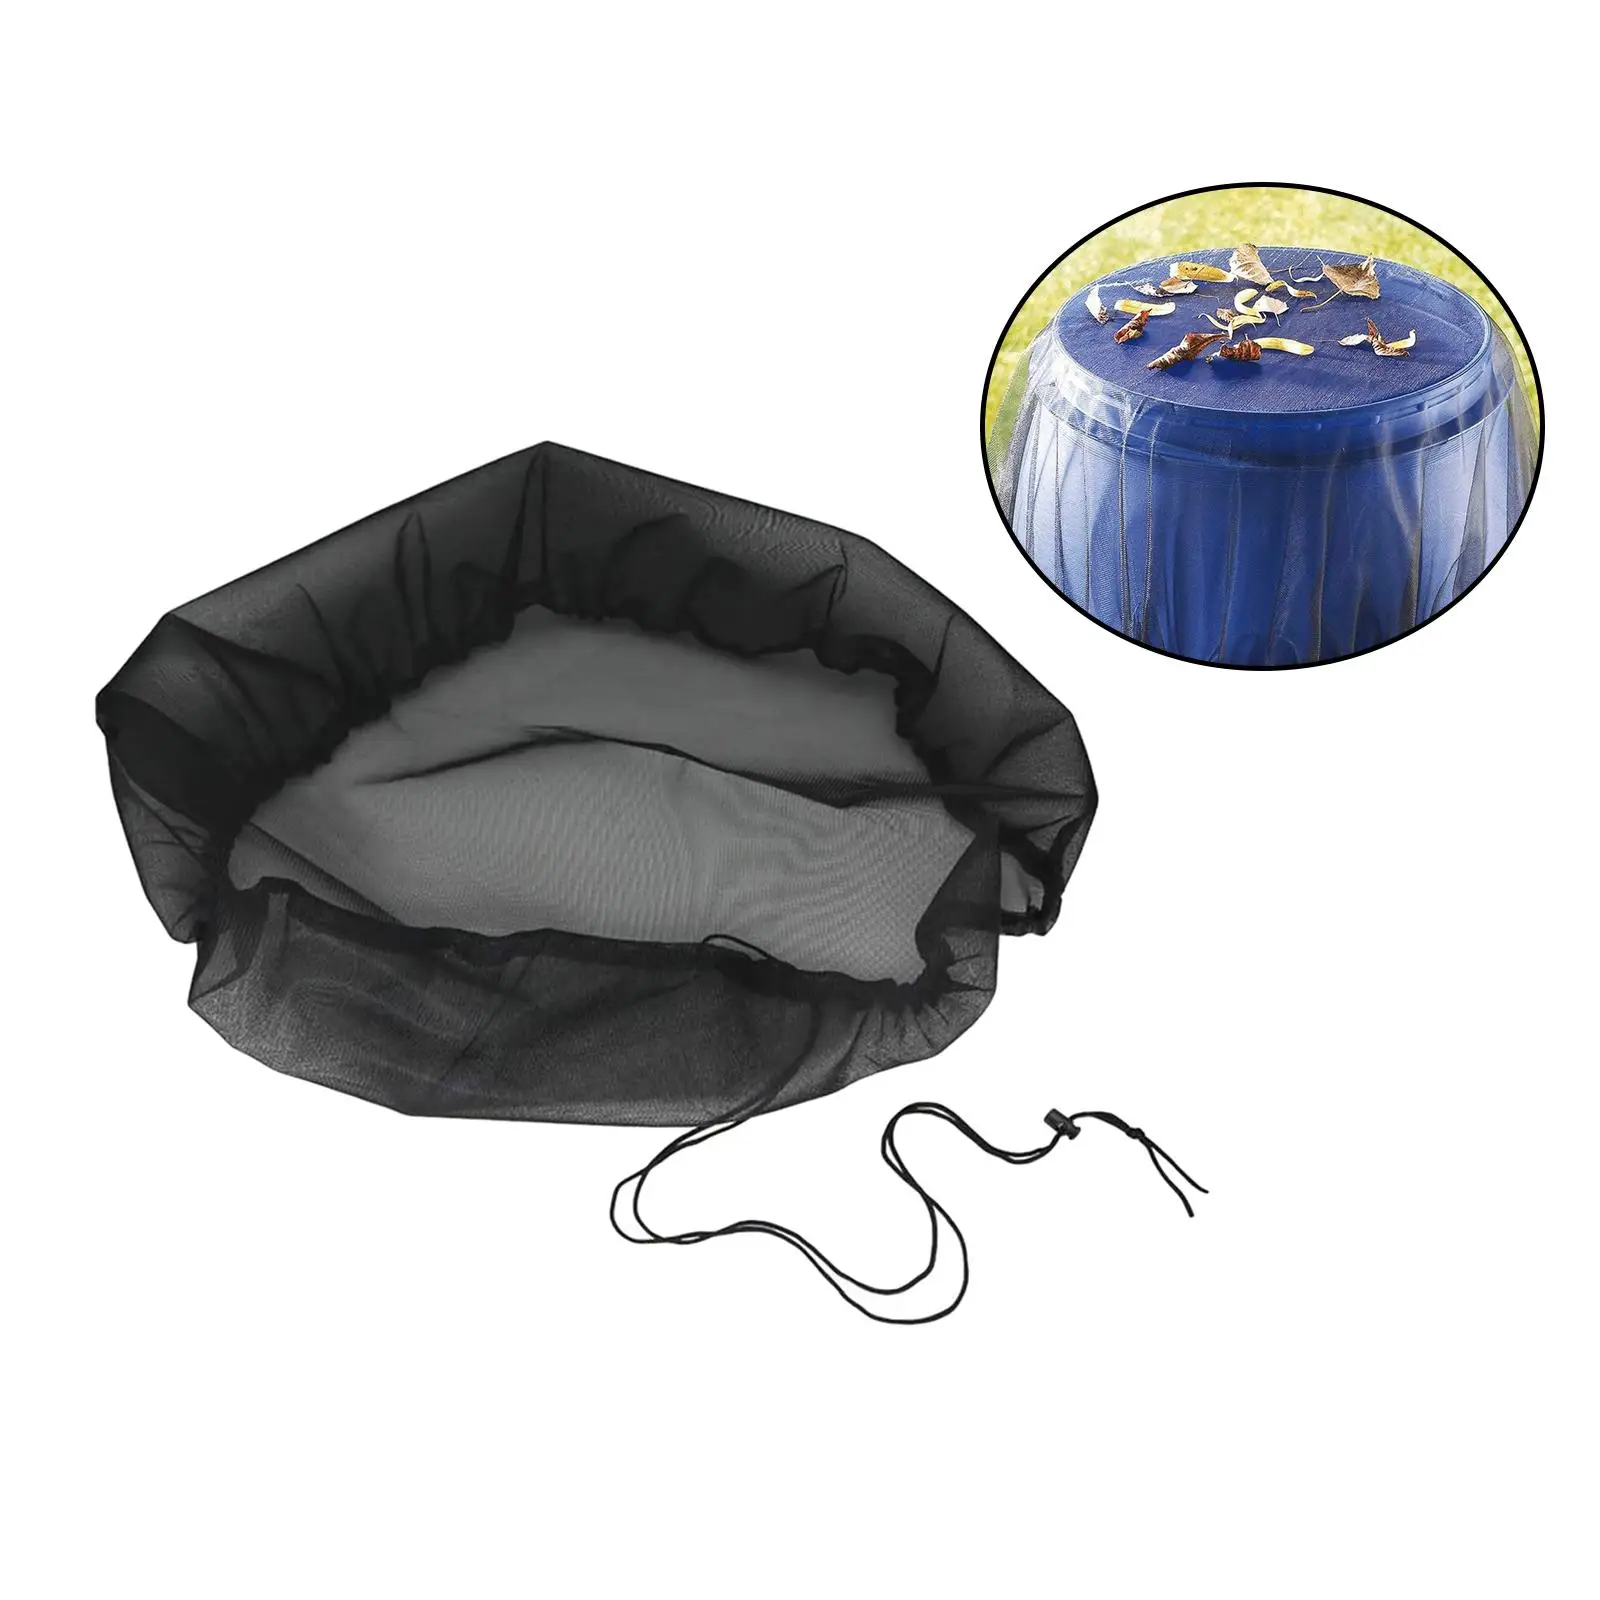 Outdoor Mesh Cover Netting with Drawstring Filter Leaves for Rain Barrels Garden